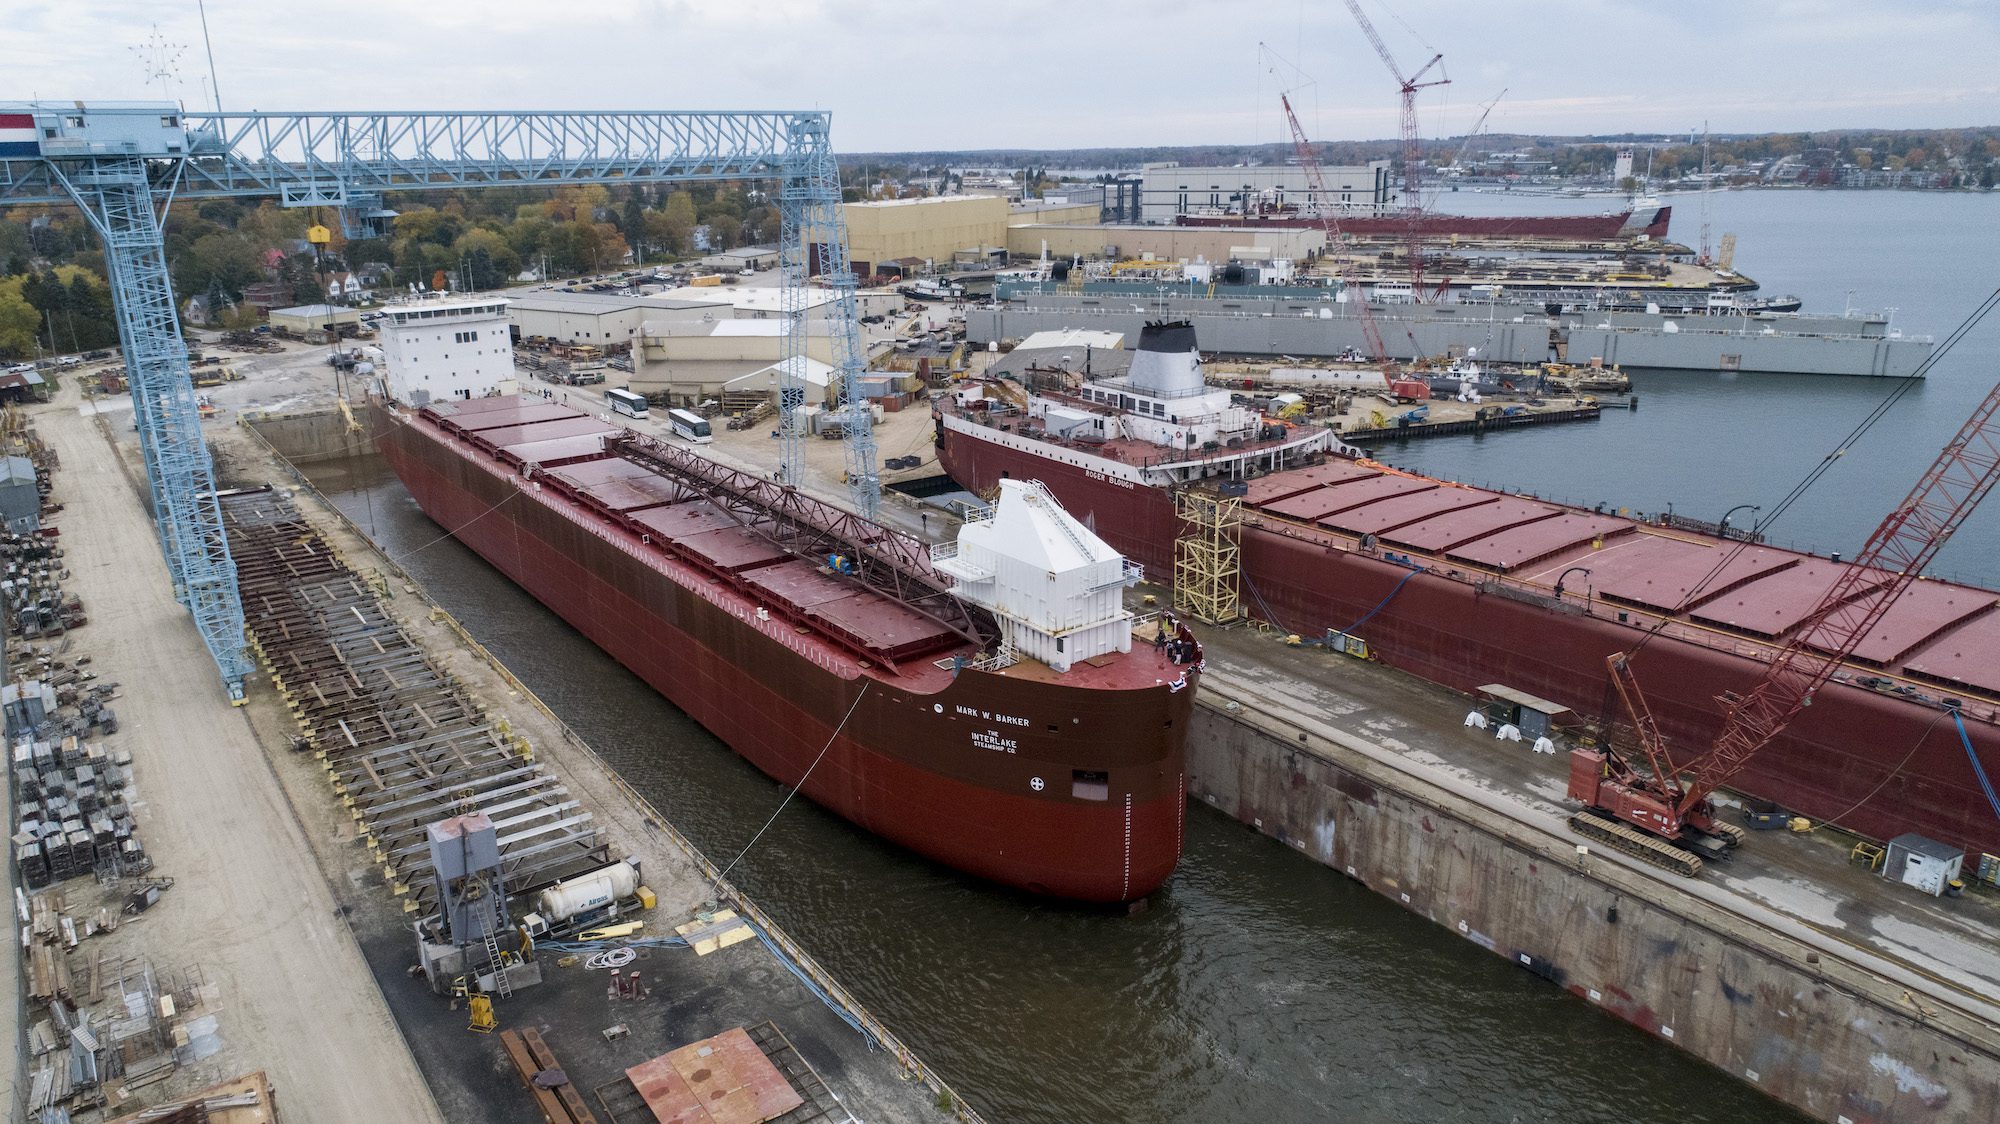 First US-Flagged Great Lakes Bulker in 40 Years Launched in Sturgeon Bay – PHOTOS